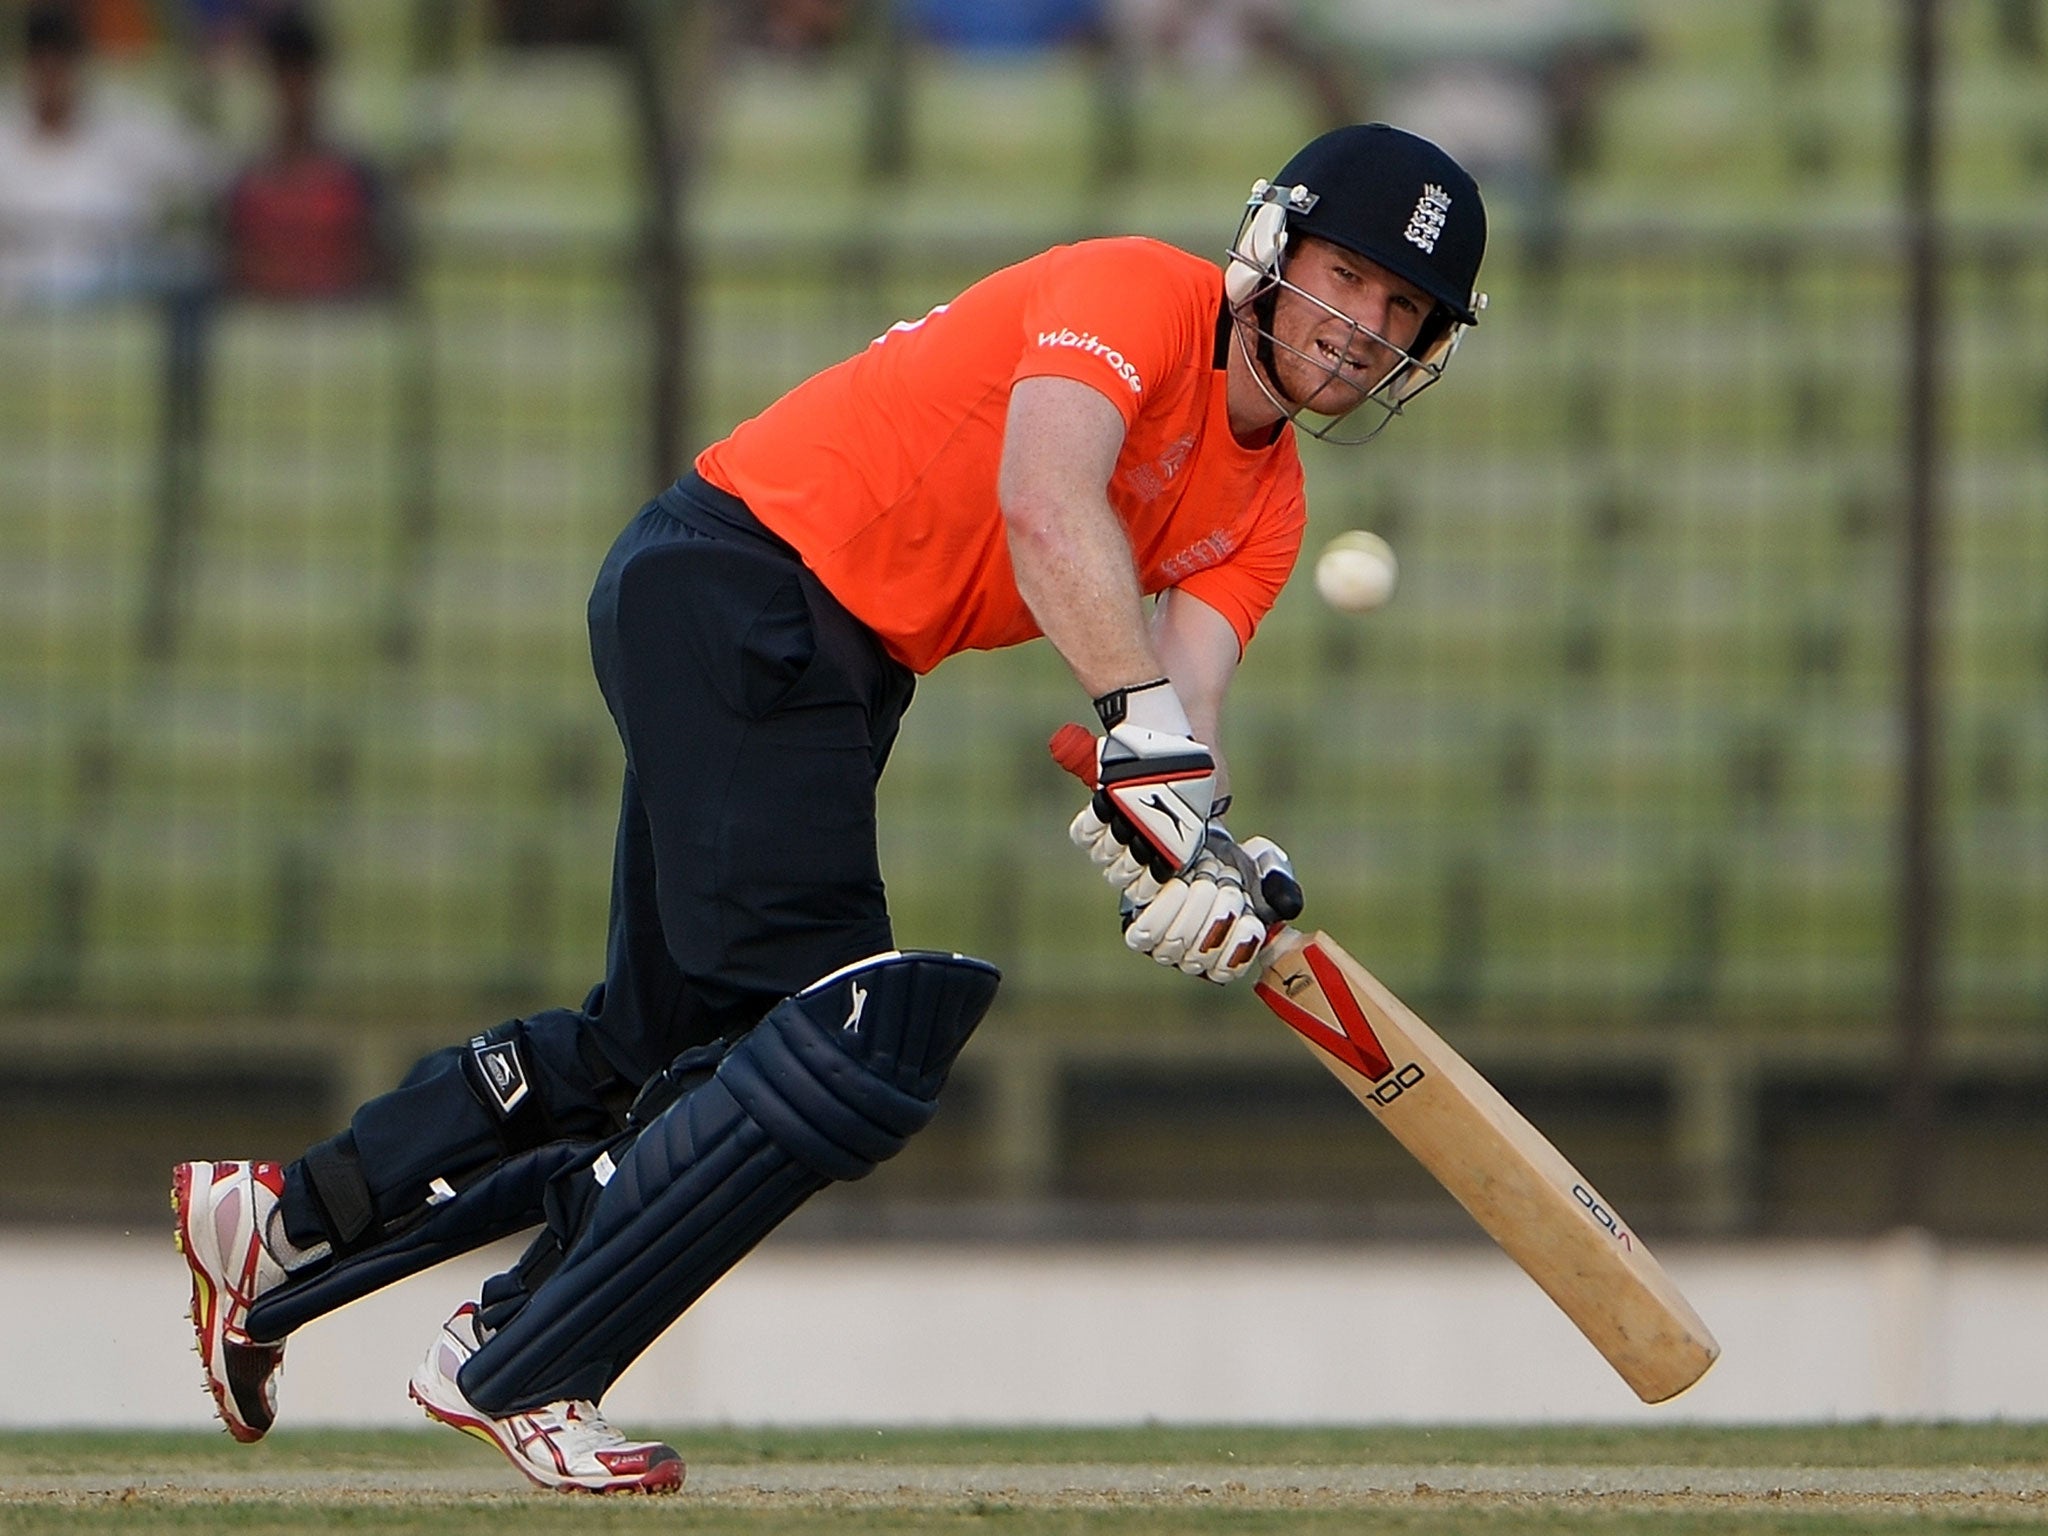 England batsman Eoin Morgan plays a shot during the ICC World Twenty20 cricket tournament warm-up match between England and the West Indies on Tuesday